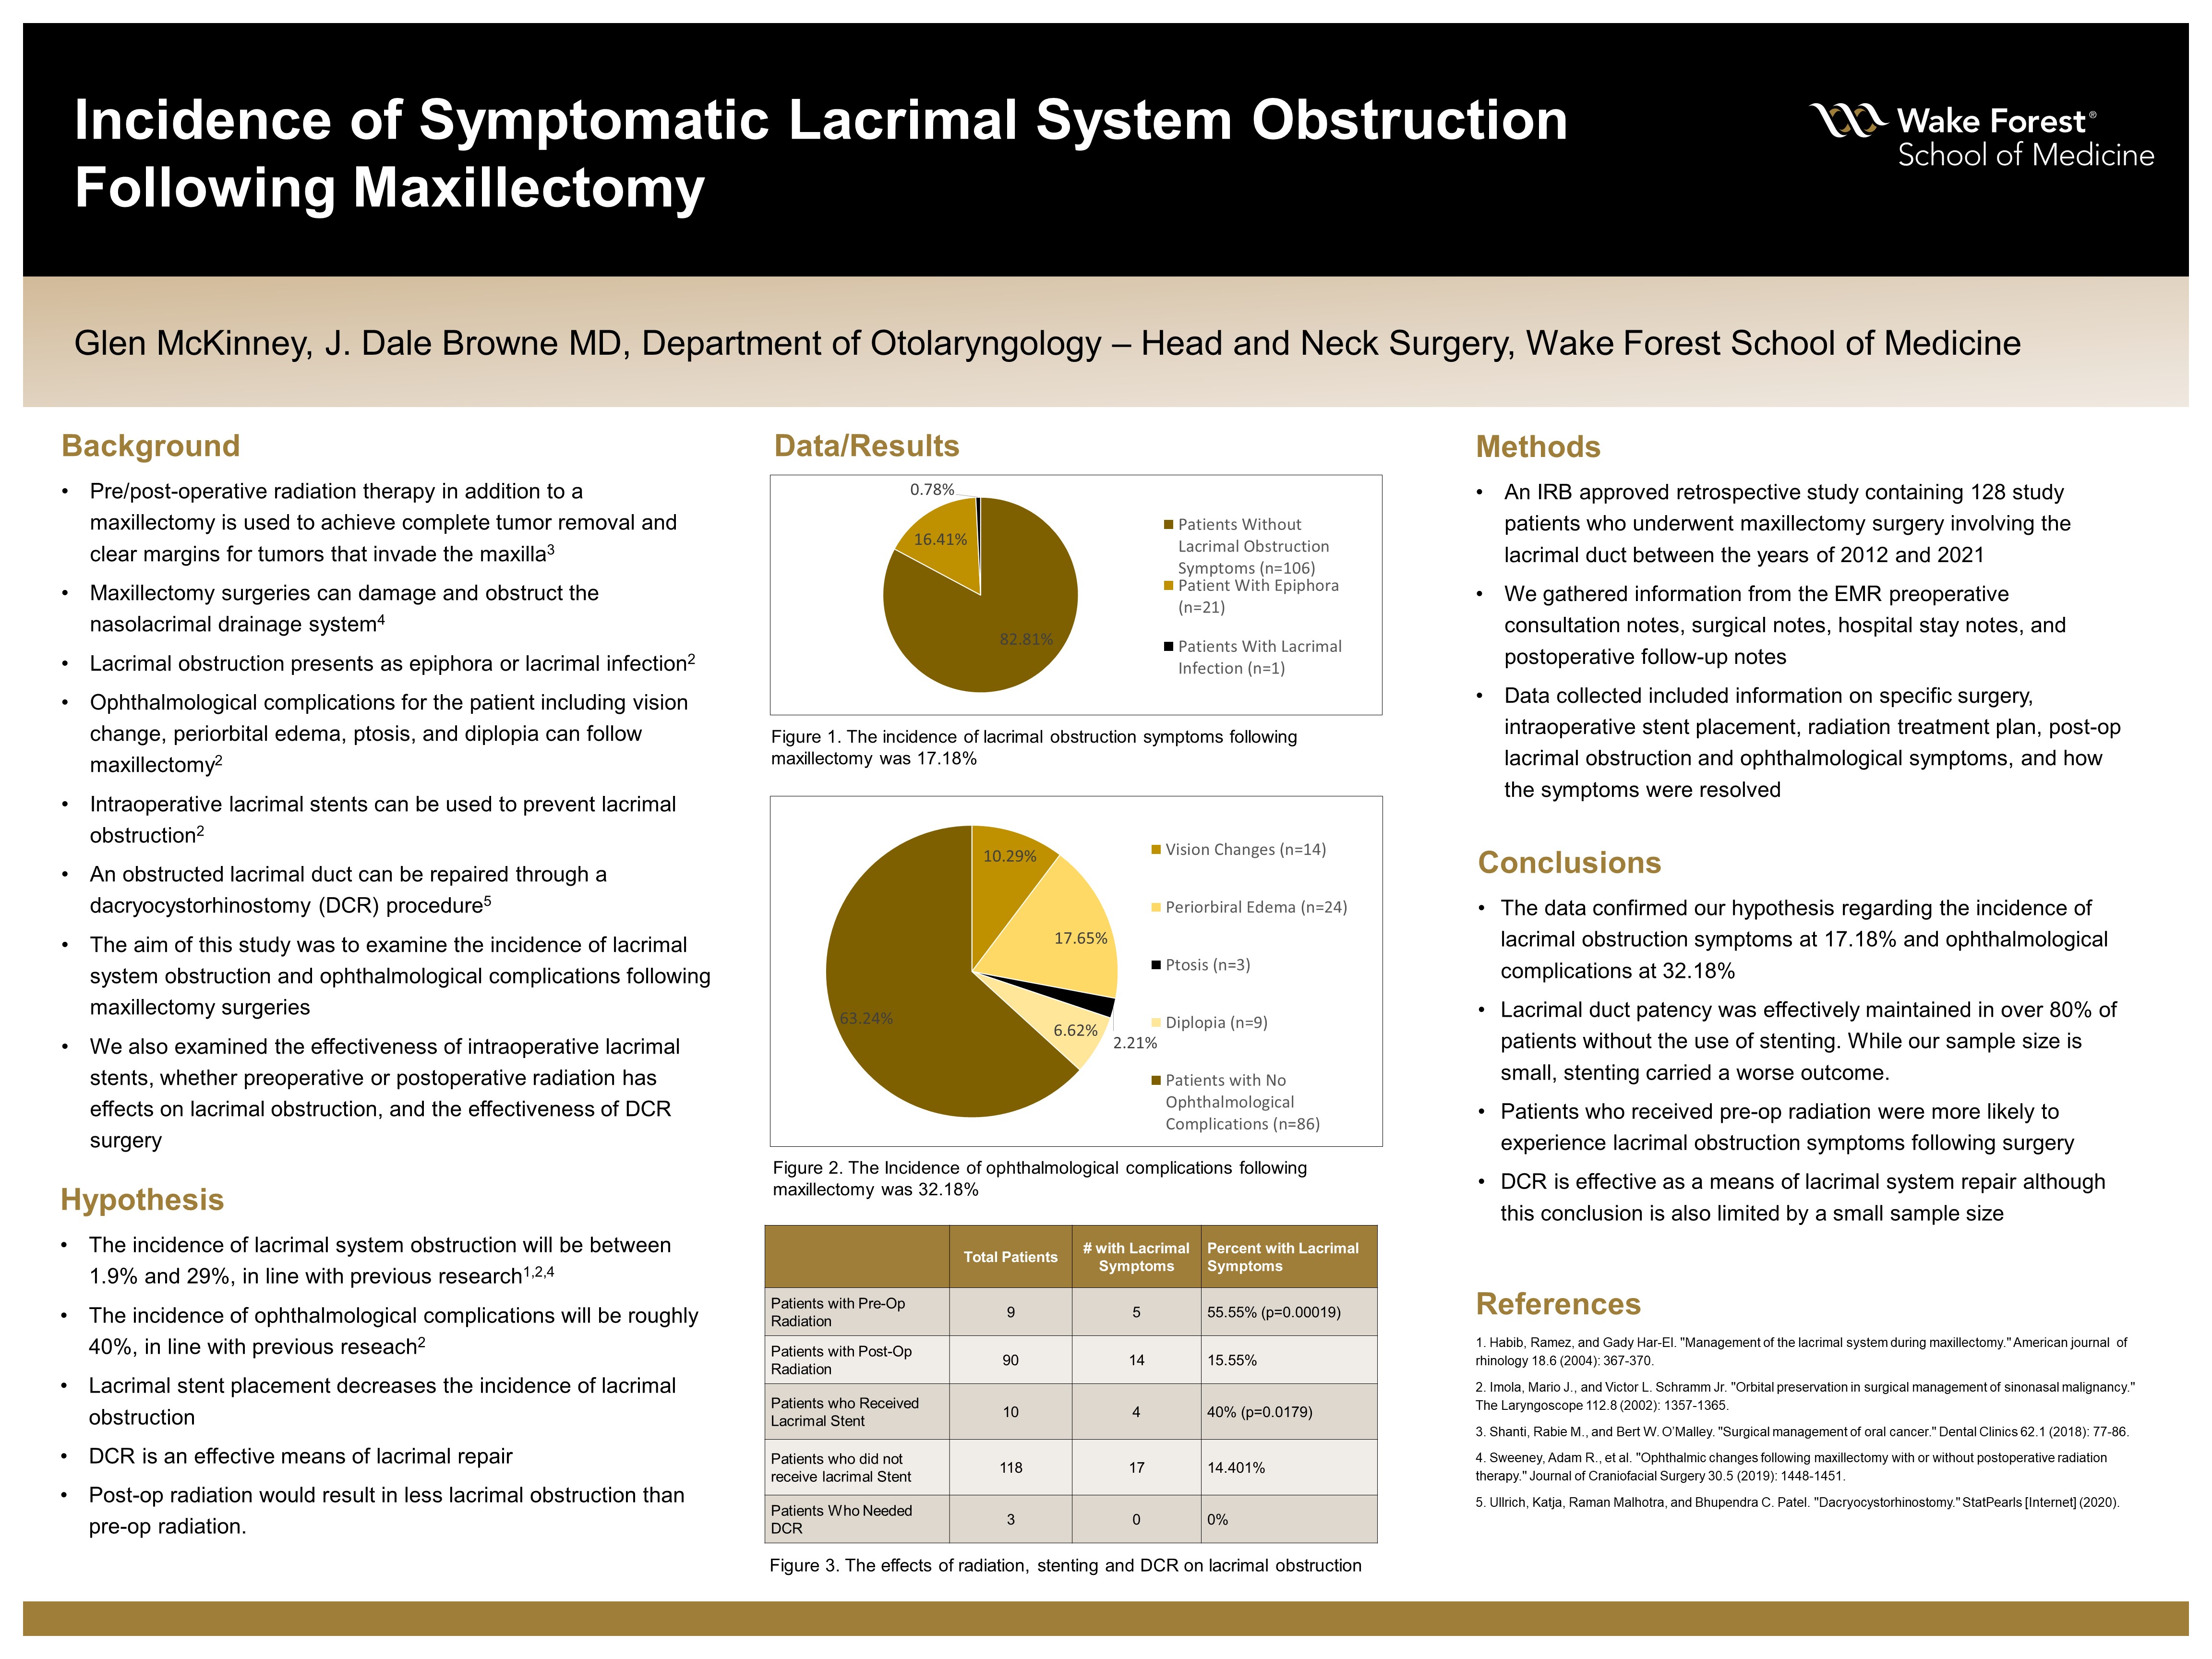 Showcase Image for Incidence of Symptomatic Lacrimal System Obstruction Following Maxillectomy